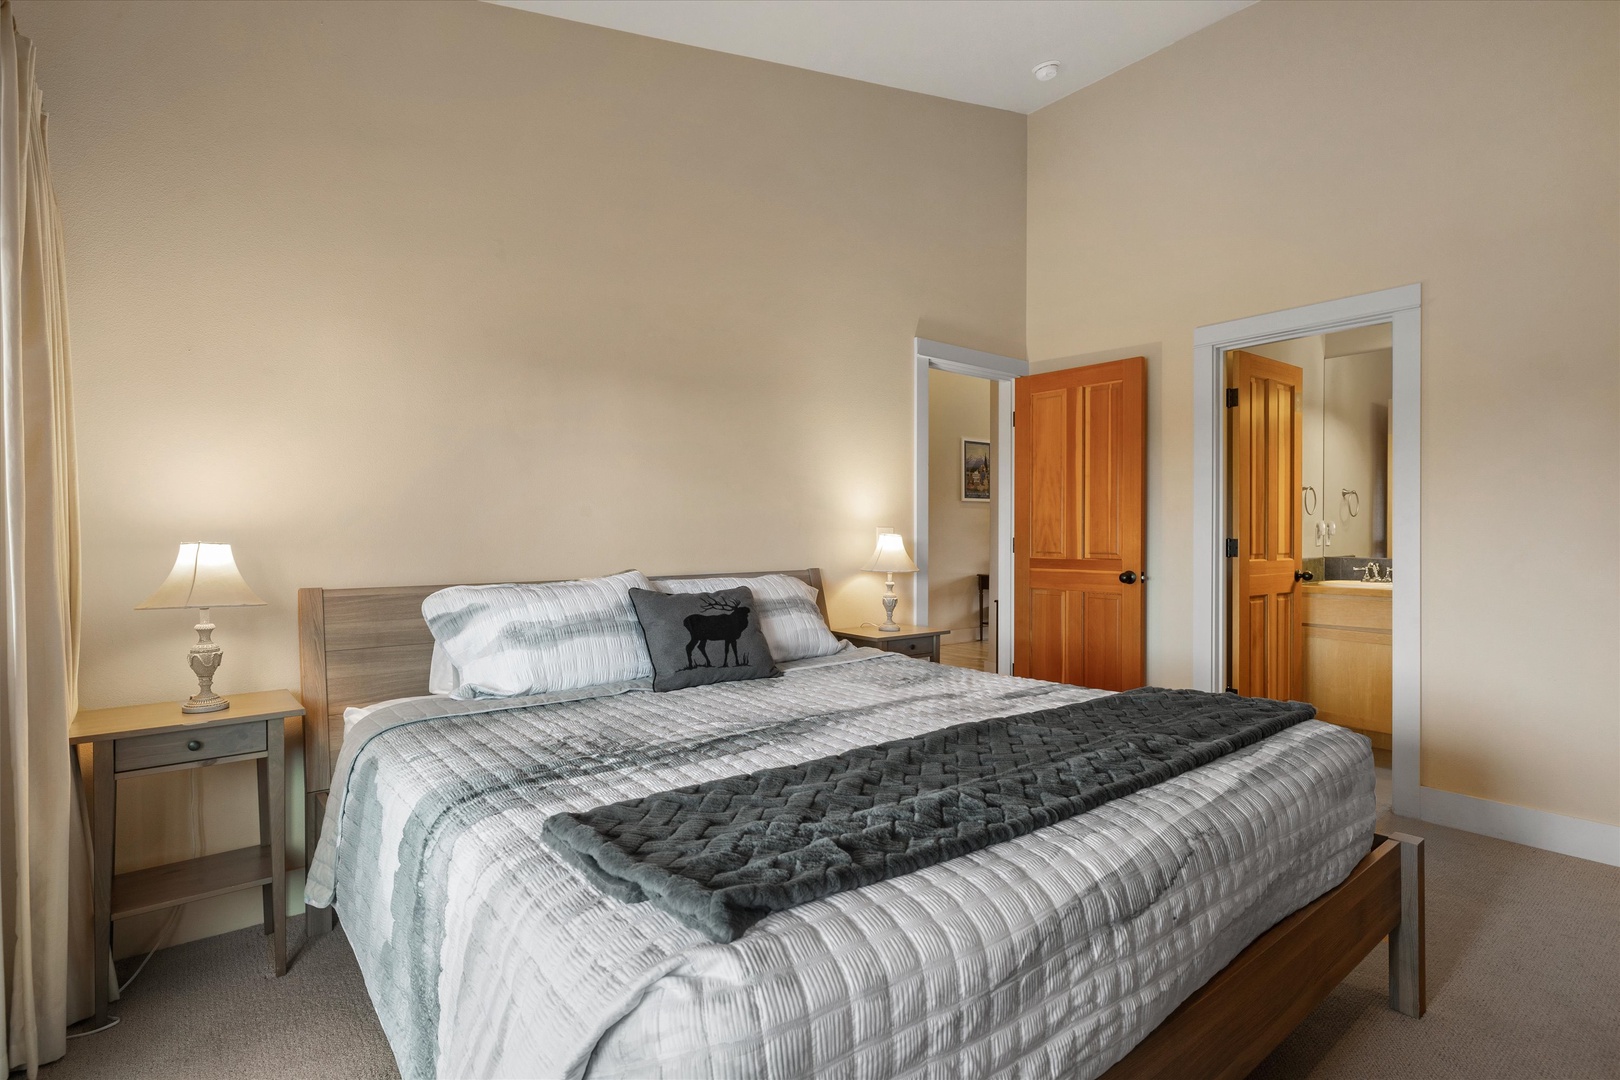 The spacious king suite boasts a private ensuite, TV, & desk workspace